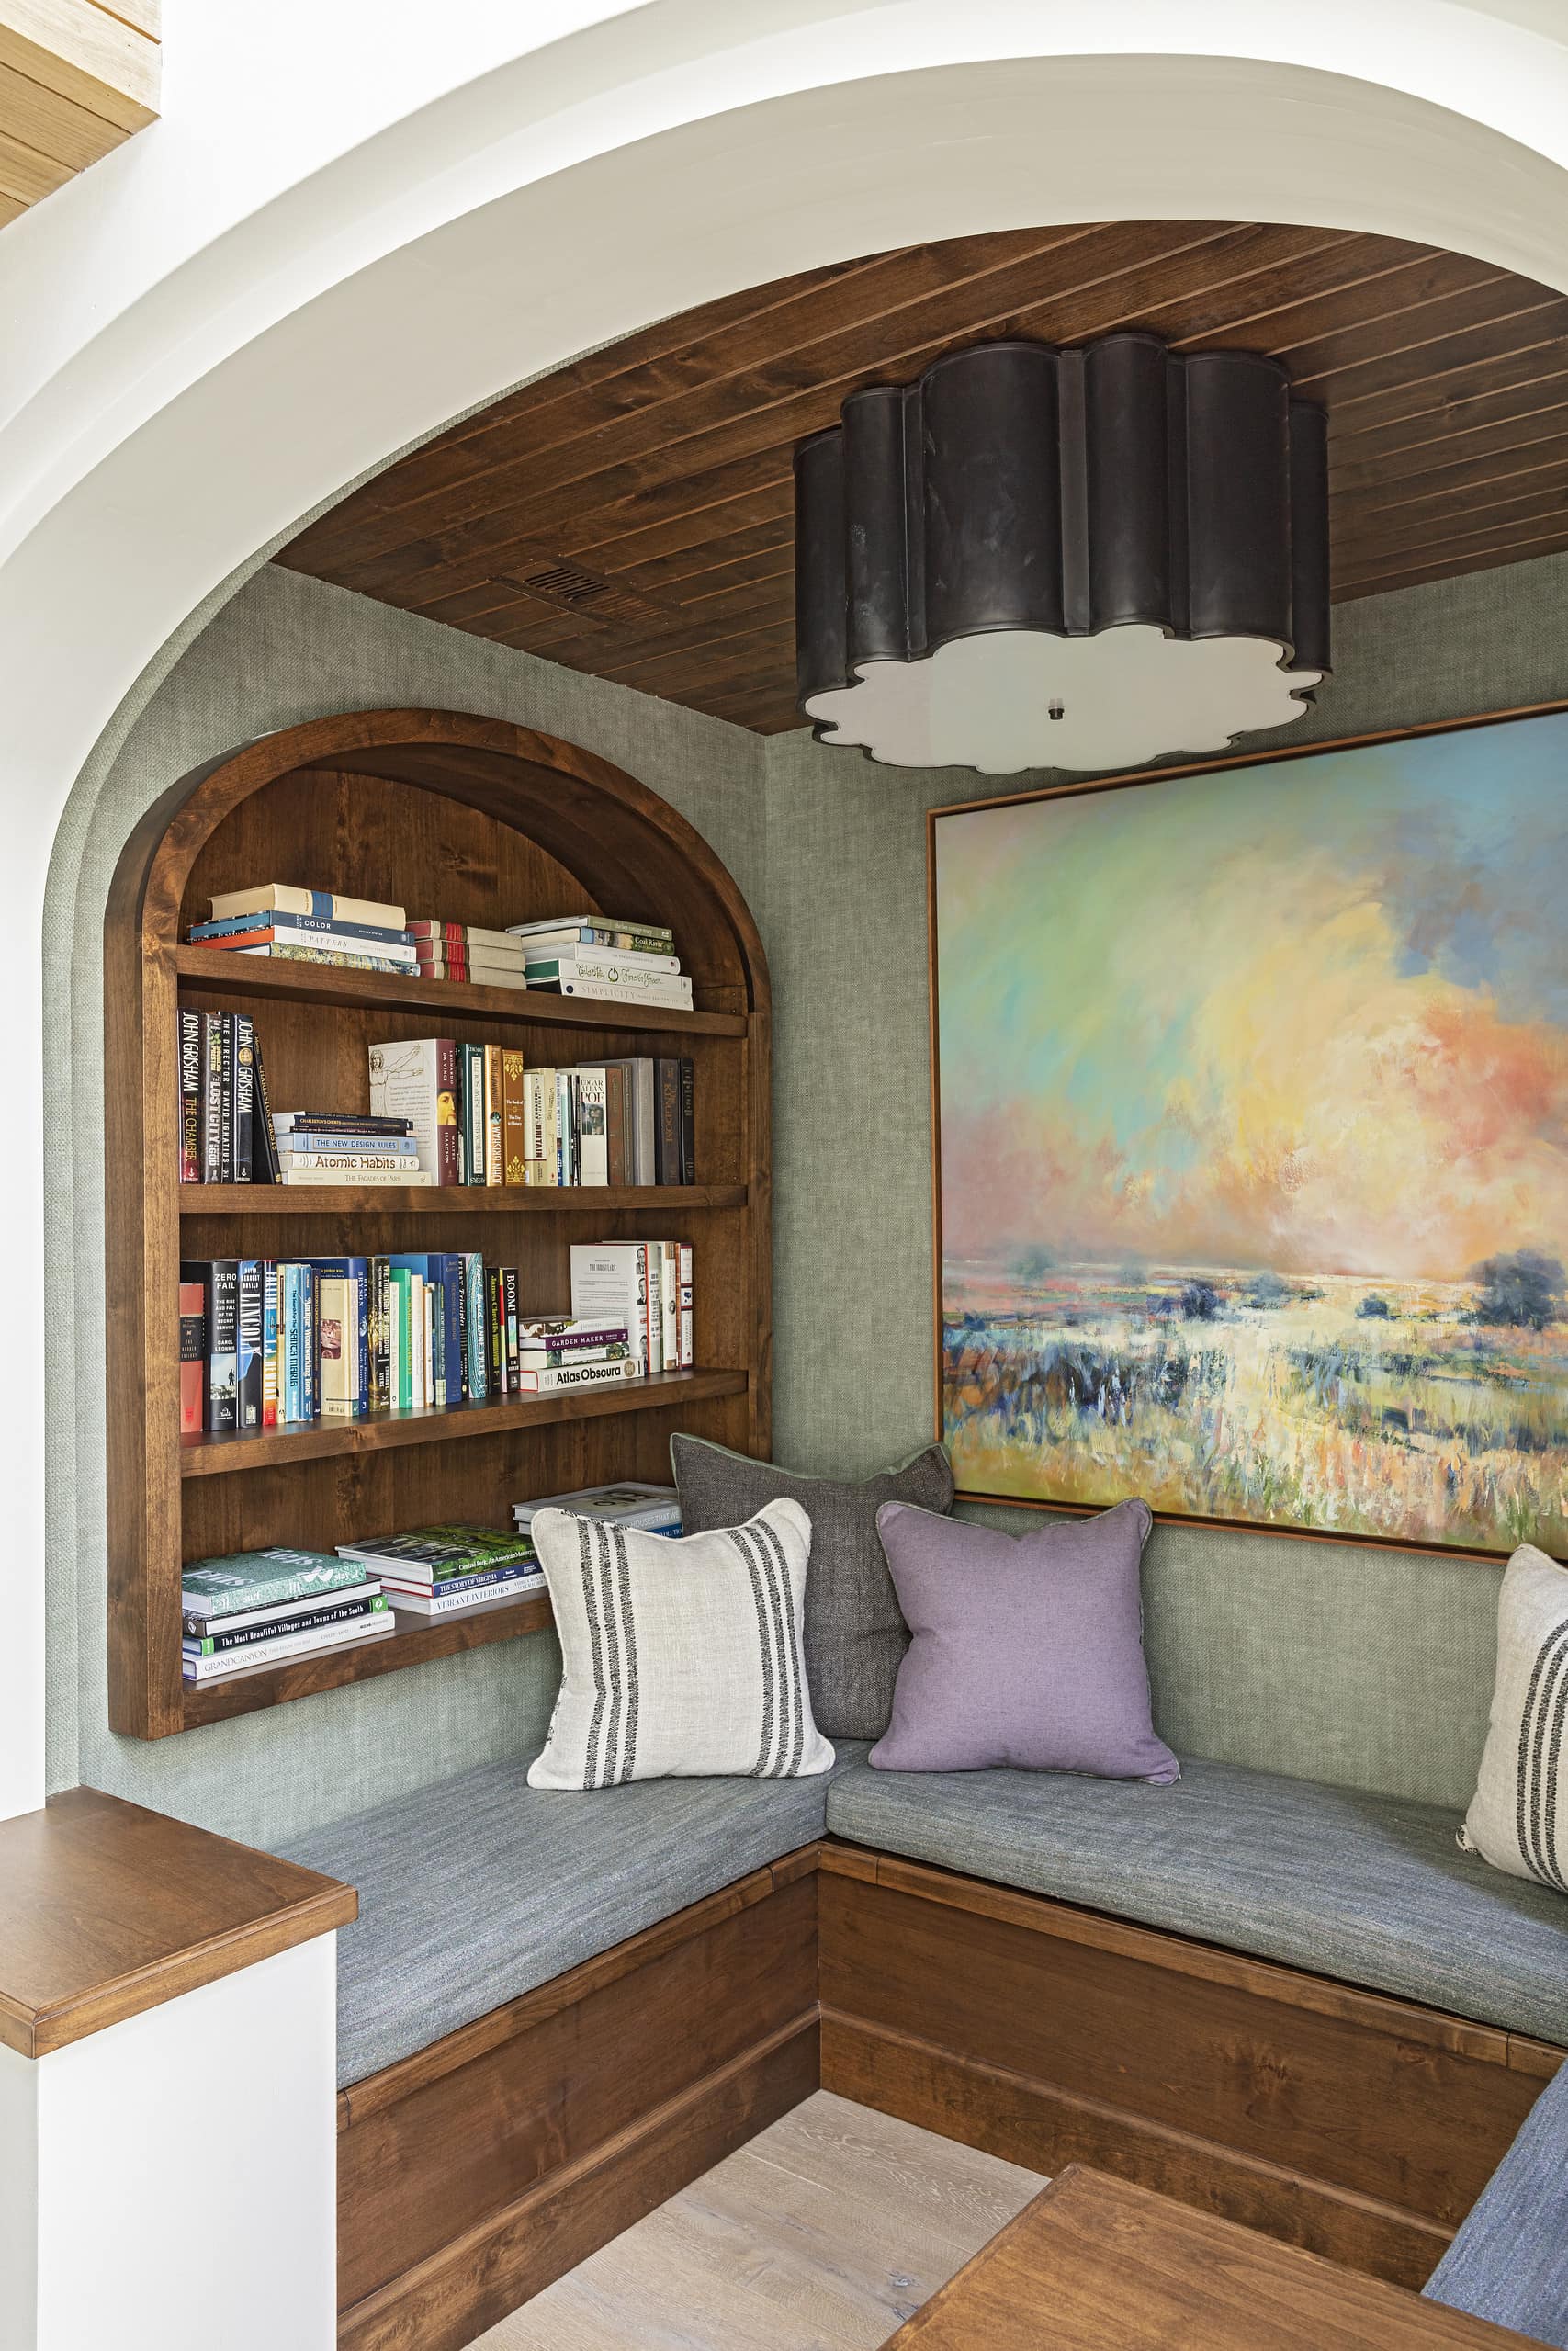 Home tour featuring sophisticated reading nook designed by Margaret Donaldson